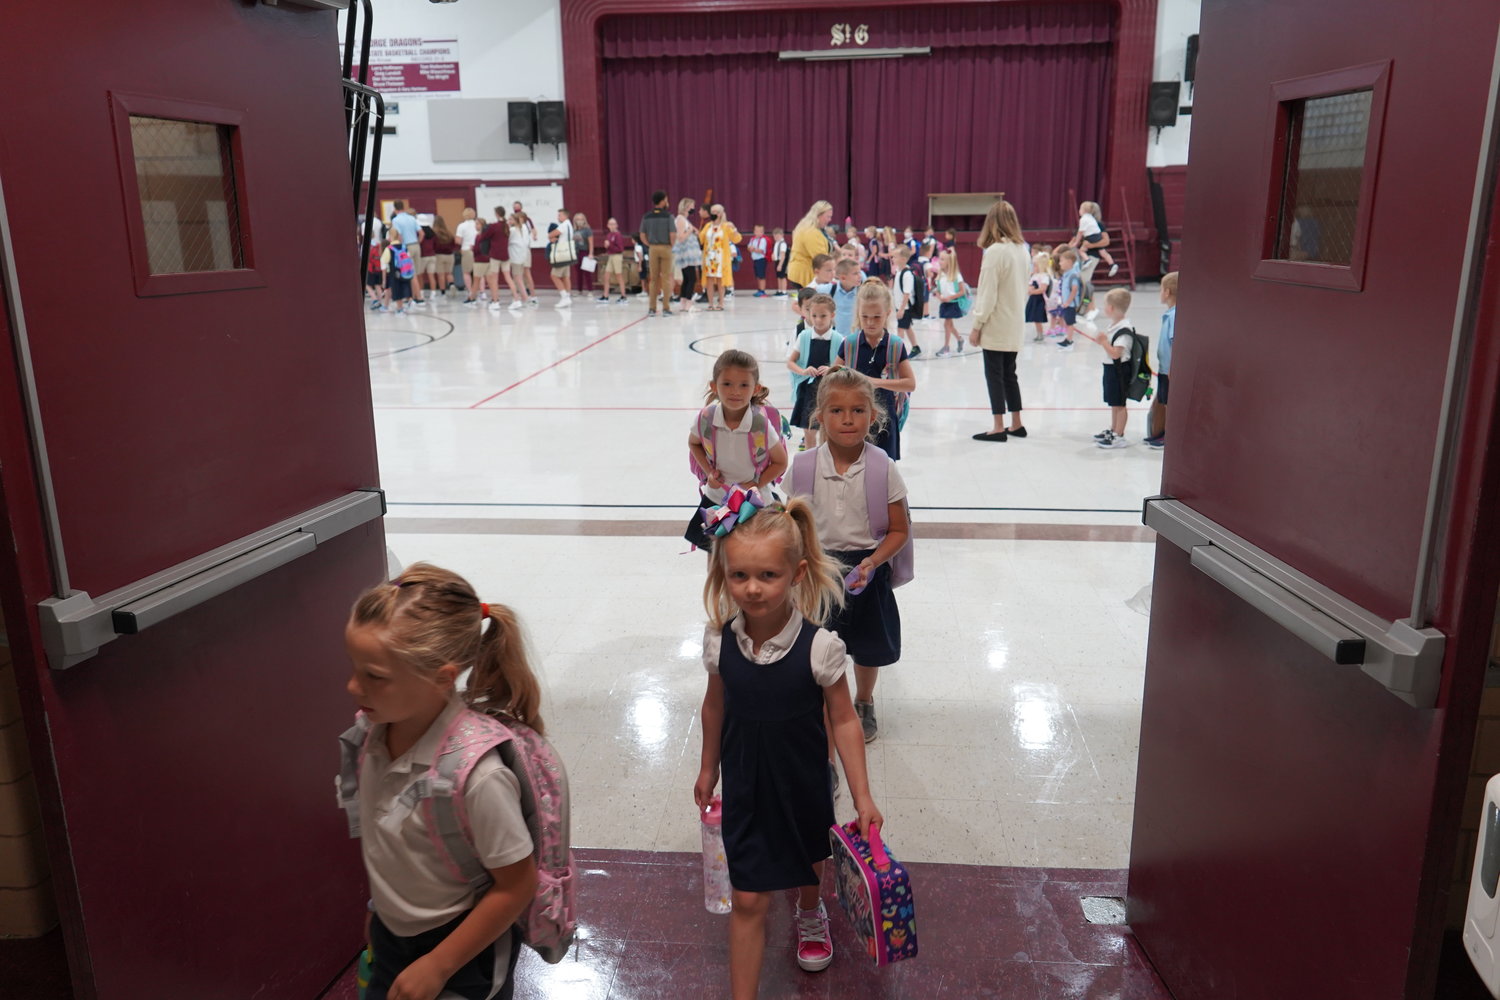 Students of St. George School in Hermann exit the gym after a morning assembly on their first day of school.